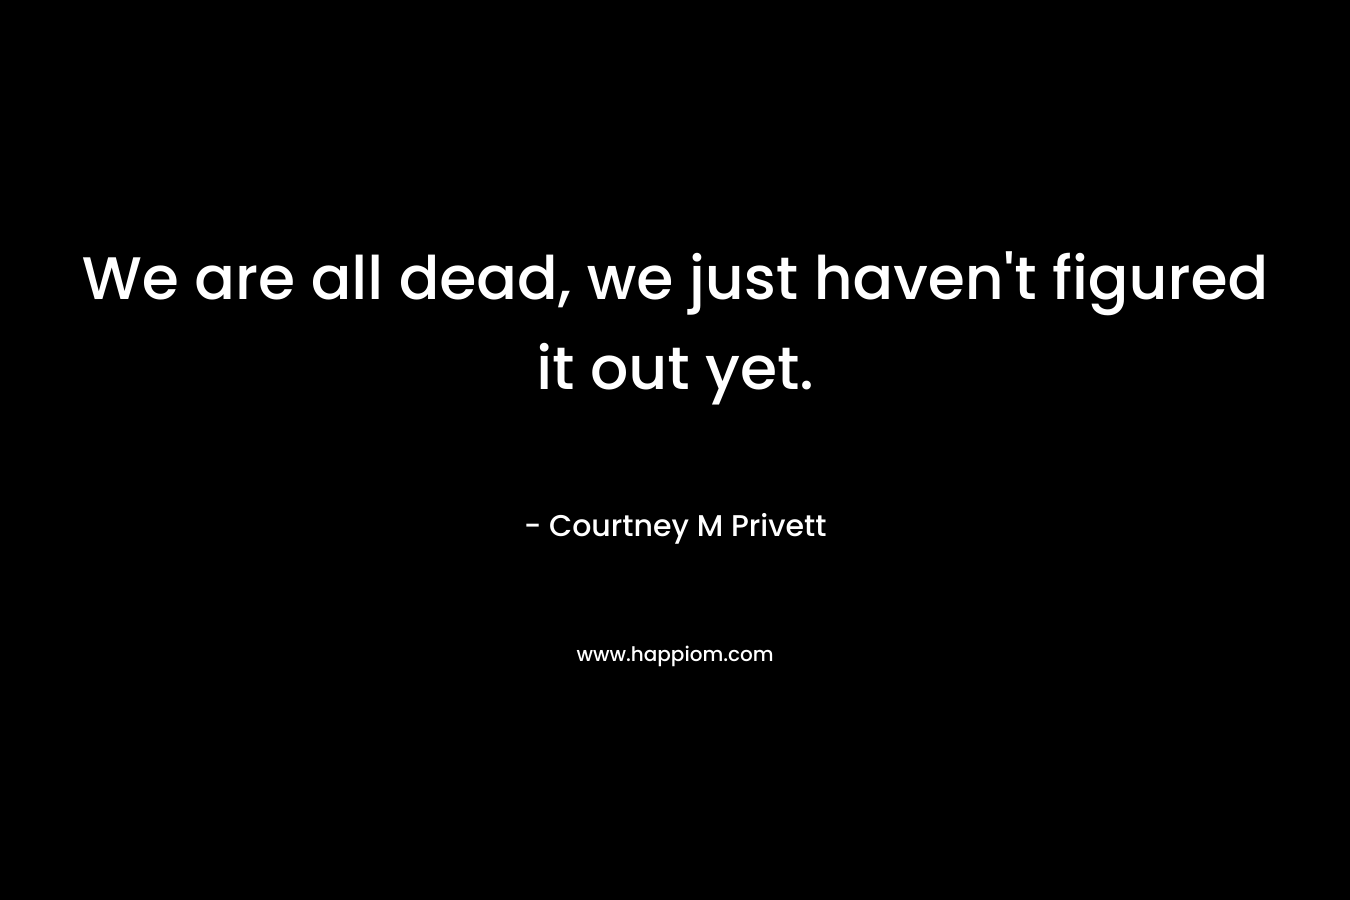 We are all dead, we just haven’t figured it out yet. – Courtney M Privett